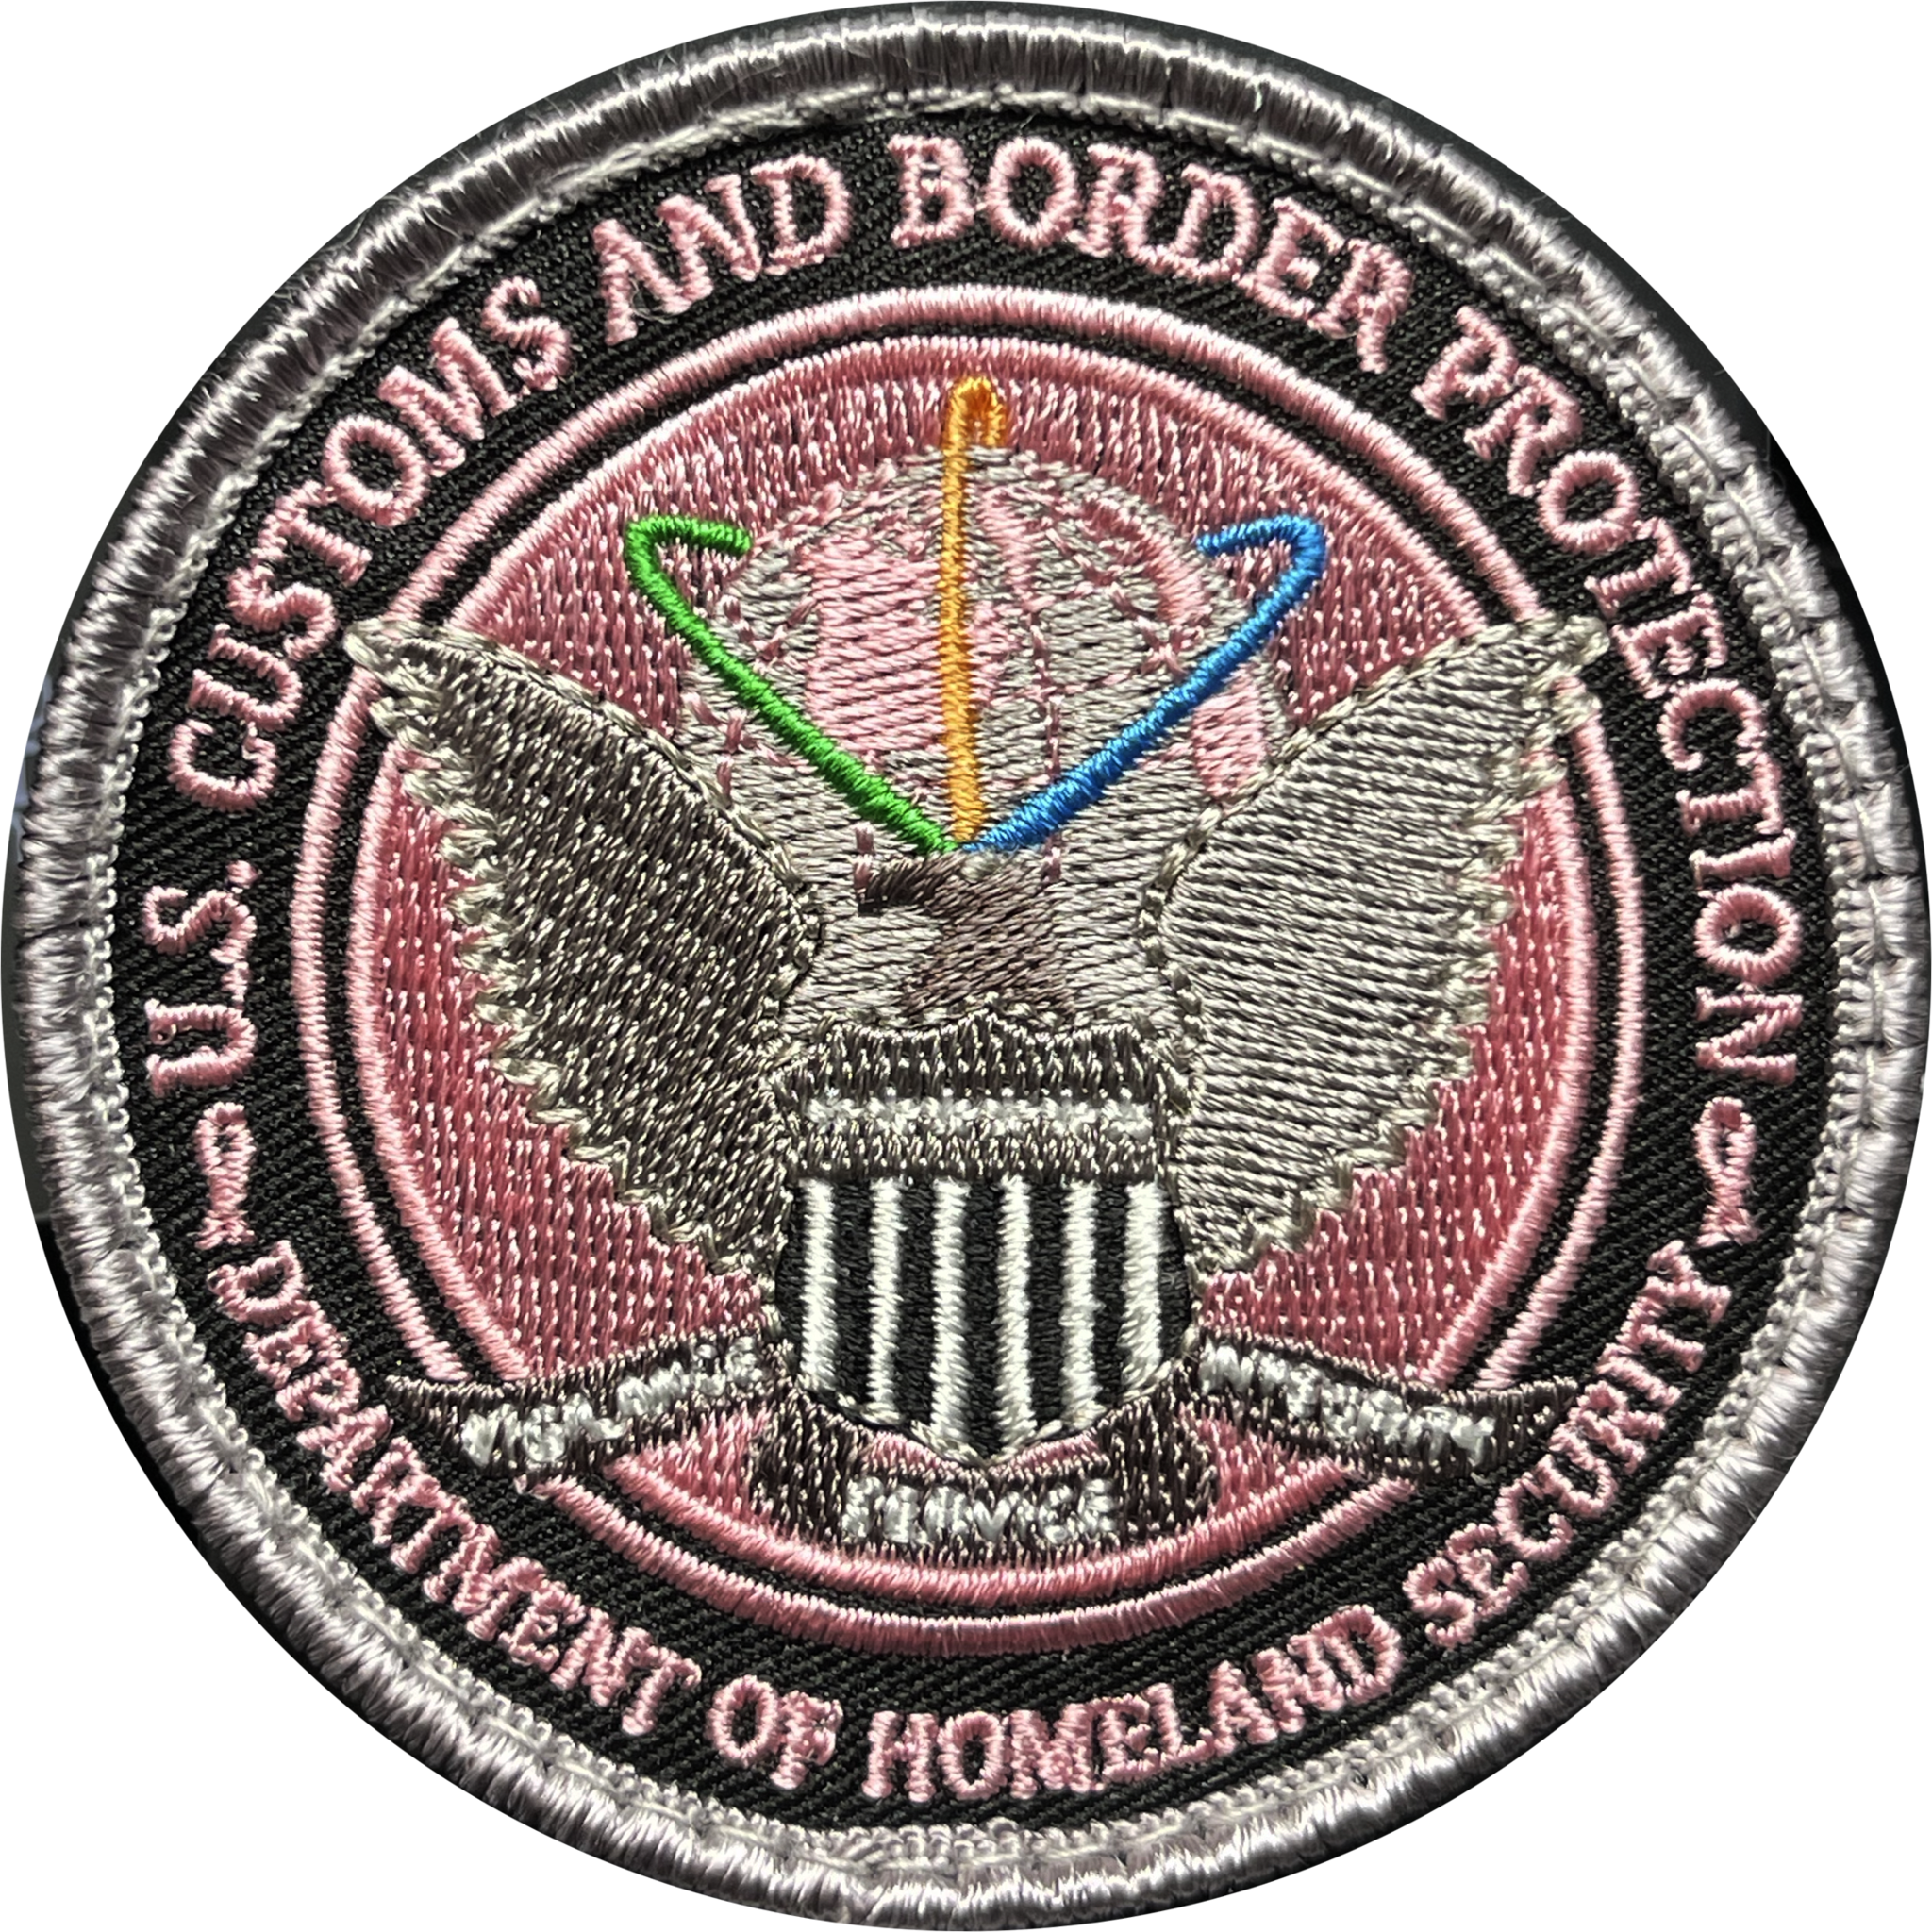 DHS Patch